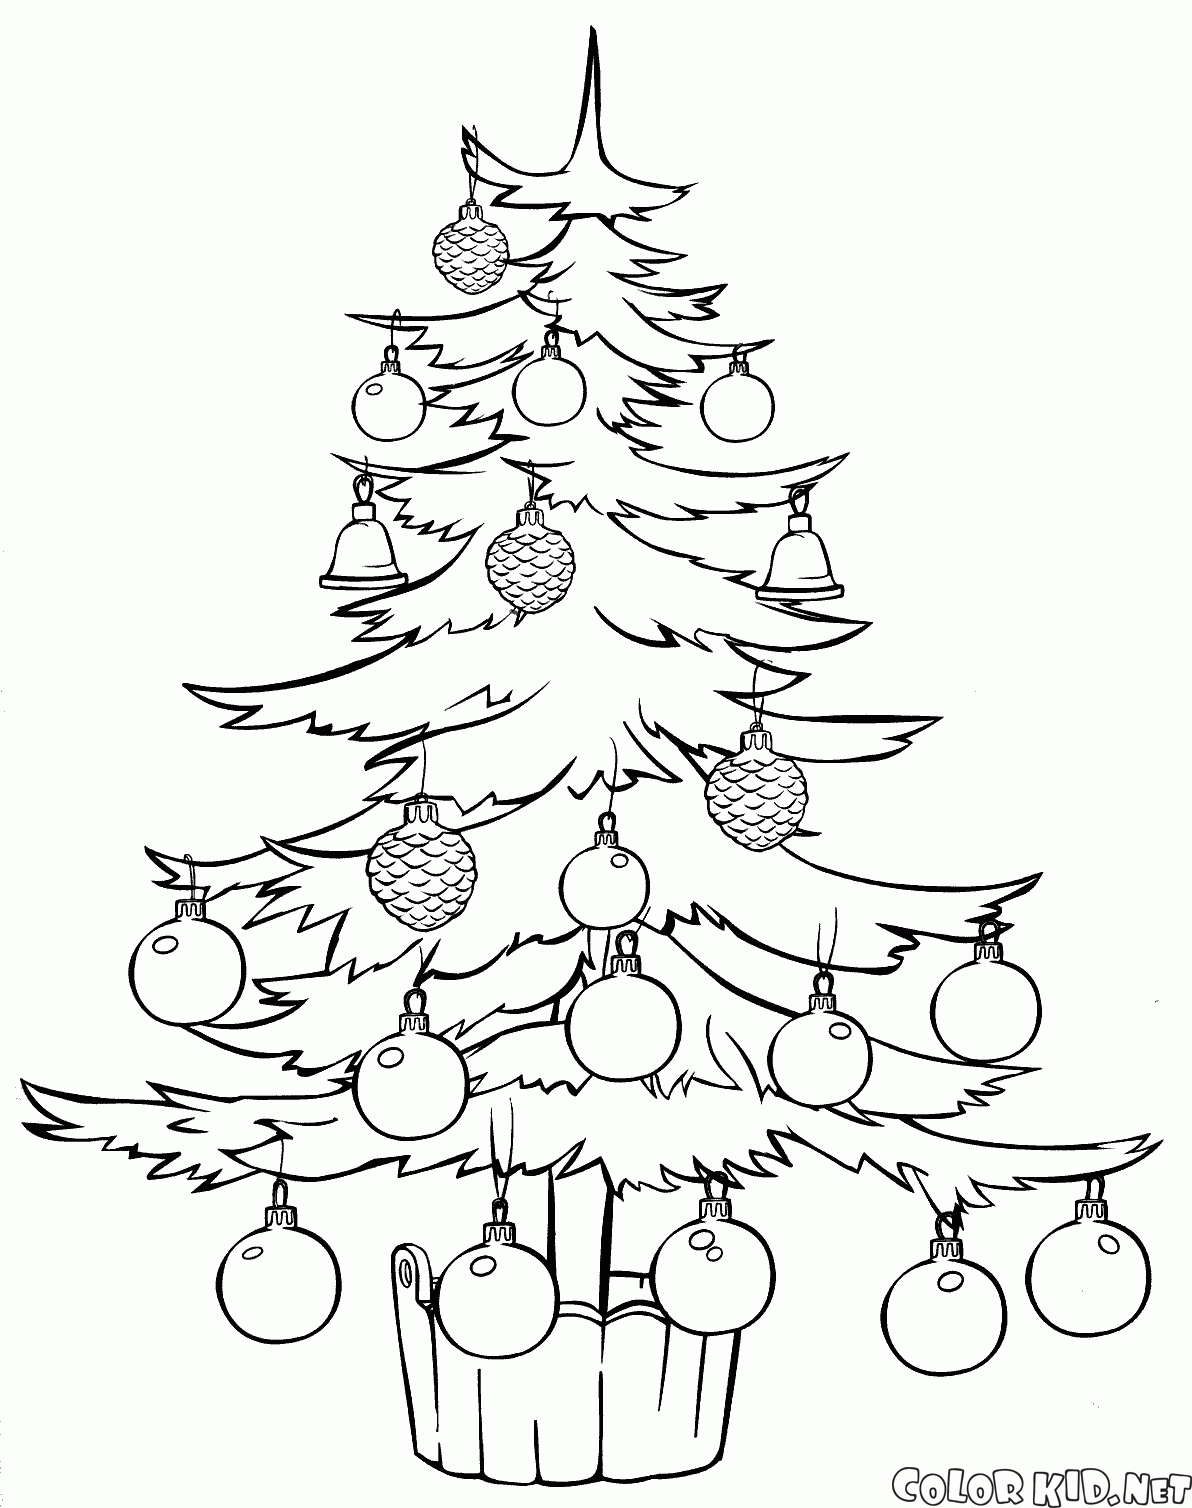 Coloring pages Christmas trees